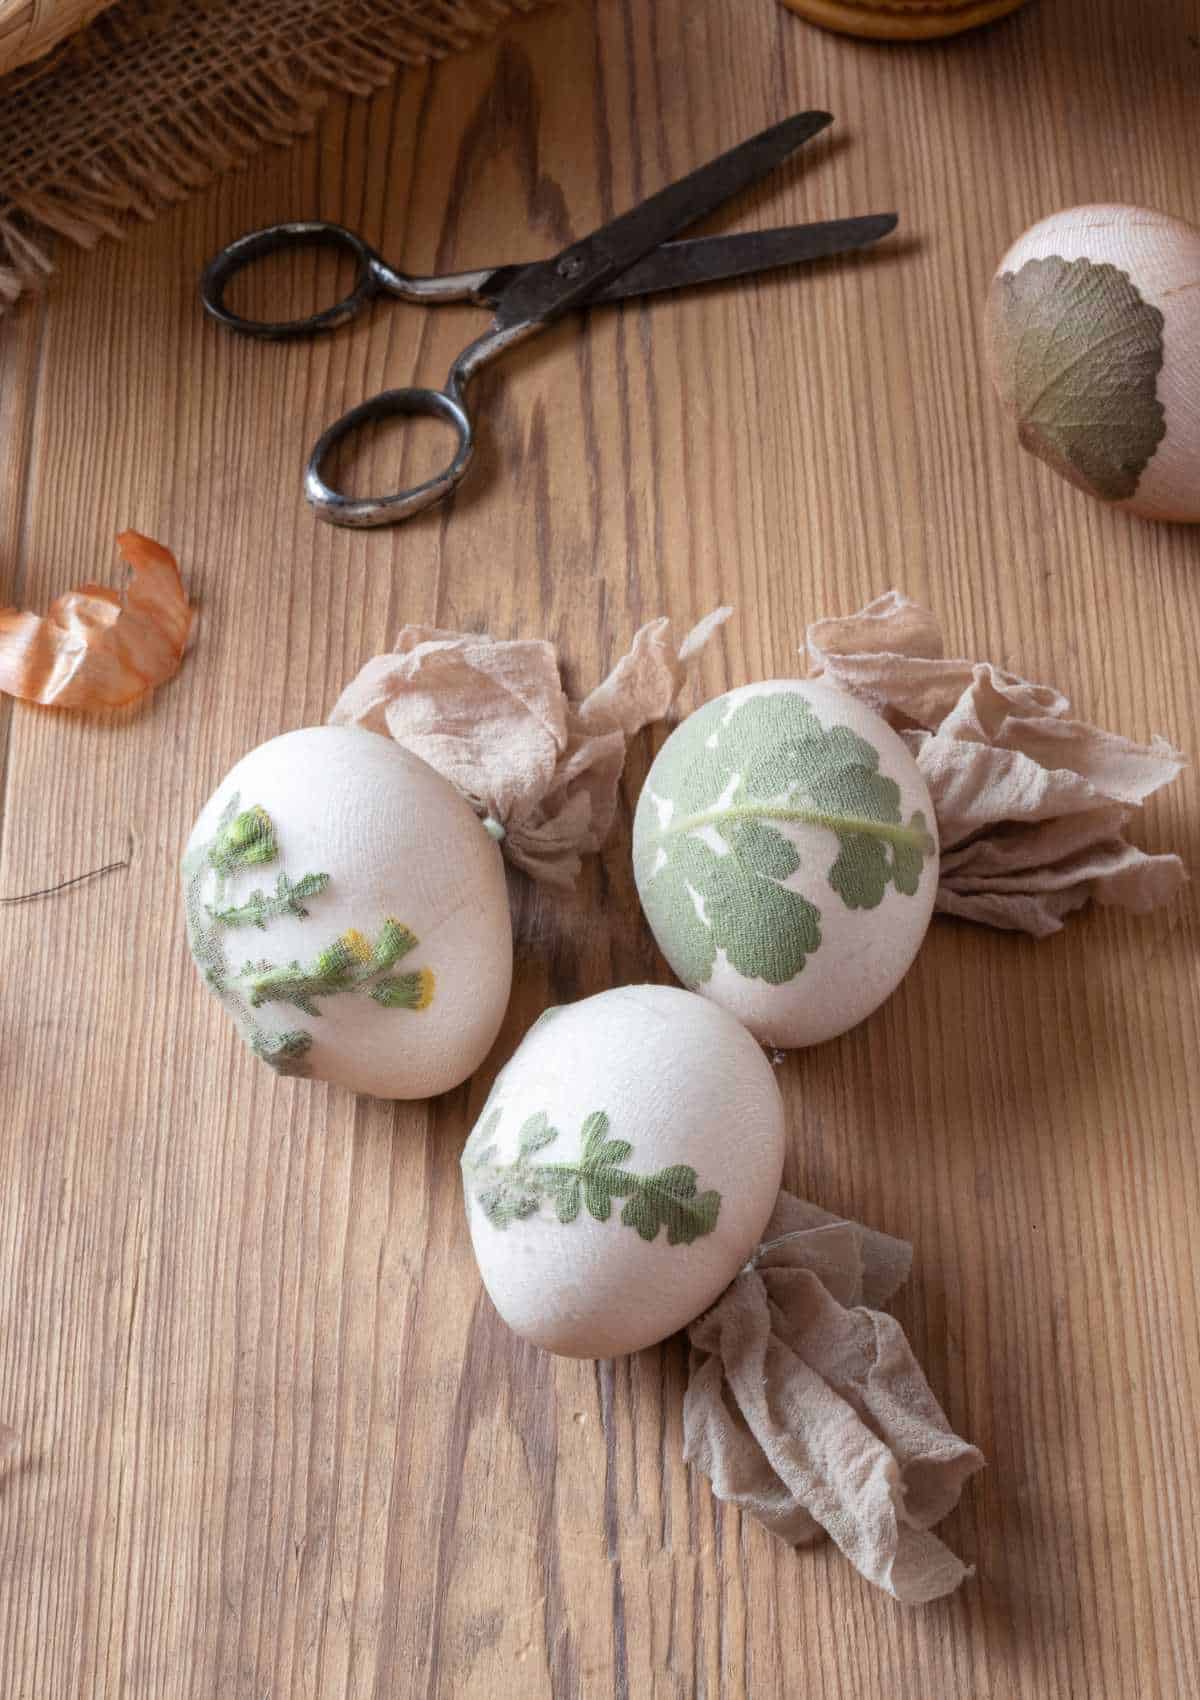 Easter eggs wrapped in cheesecloth with flowers and herbs for an onion skin dye bath